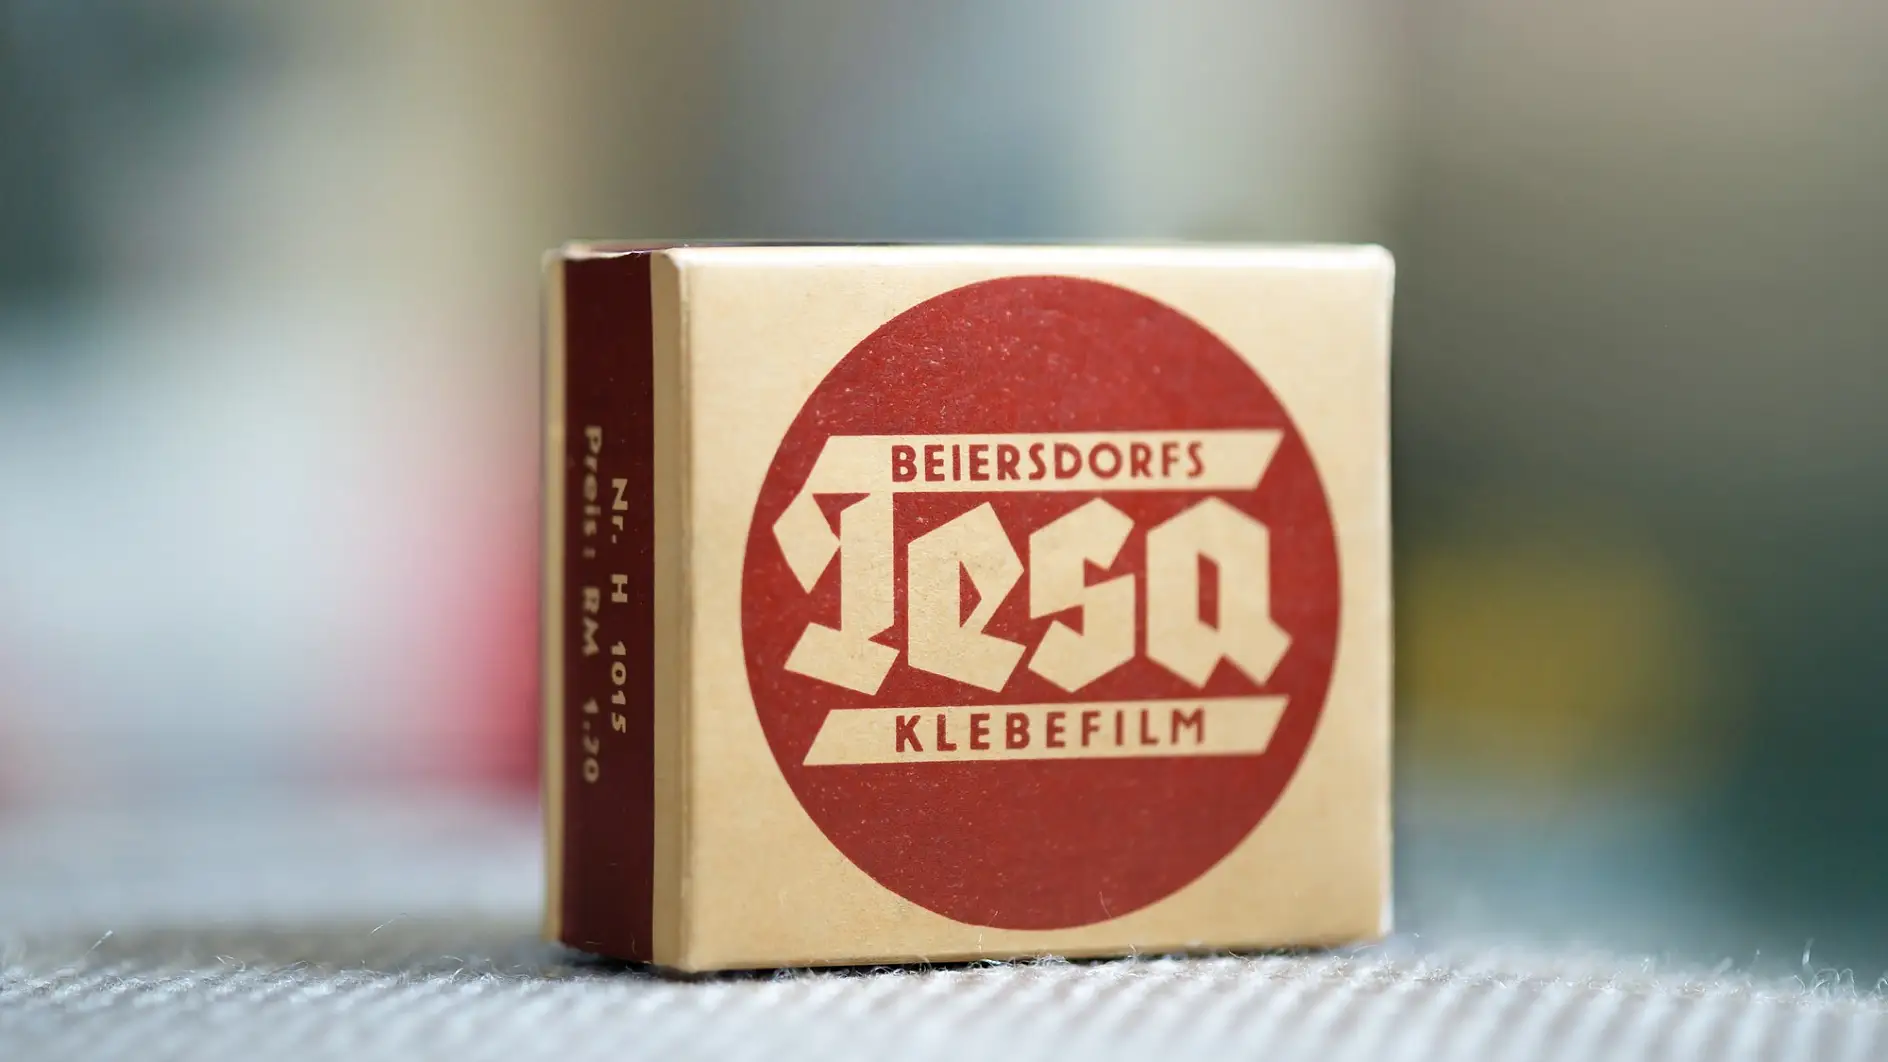 Our classic product tesafilm® in packaging from 1936.